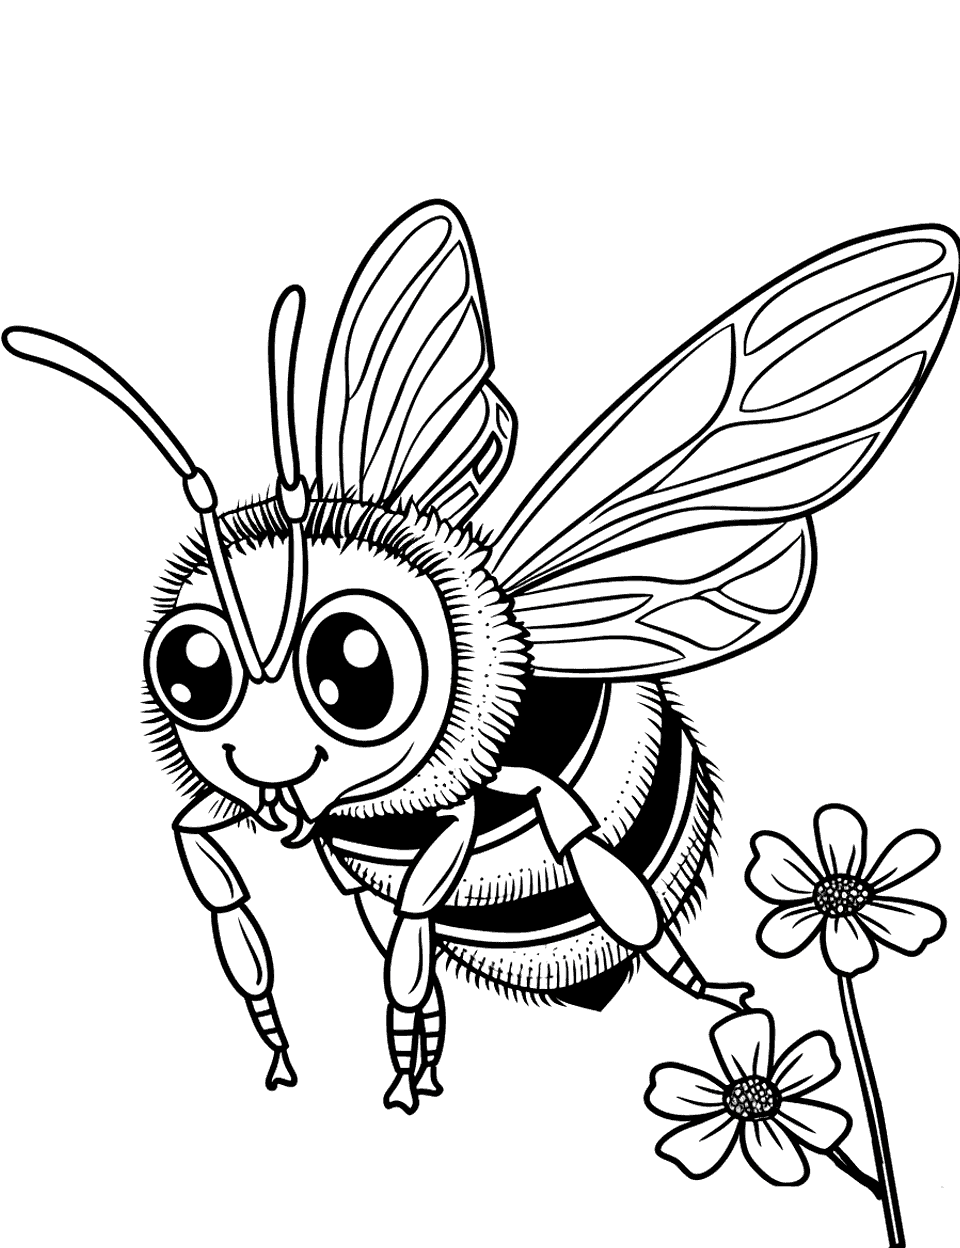 Honey Bee Returning to Hive Coloring Page - A honey bee flying back to its hive with legs full of pollen.